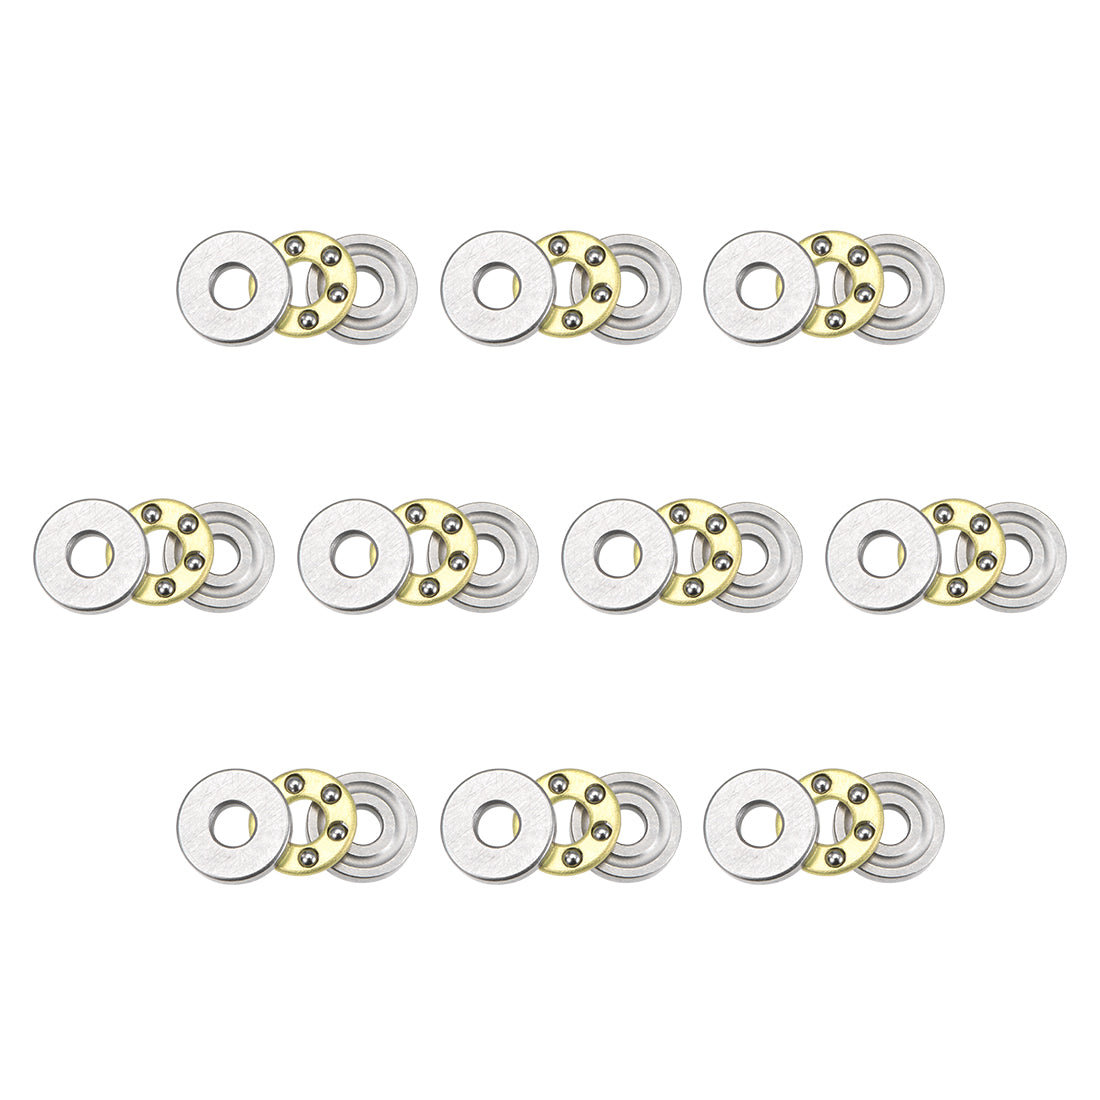 uxcell Uxcell F2-6M Miniature Thrust Ball Bearing 2x6x3mm Chrome Steel with Washer 10Pcs